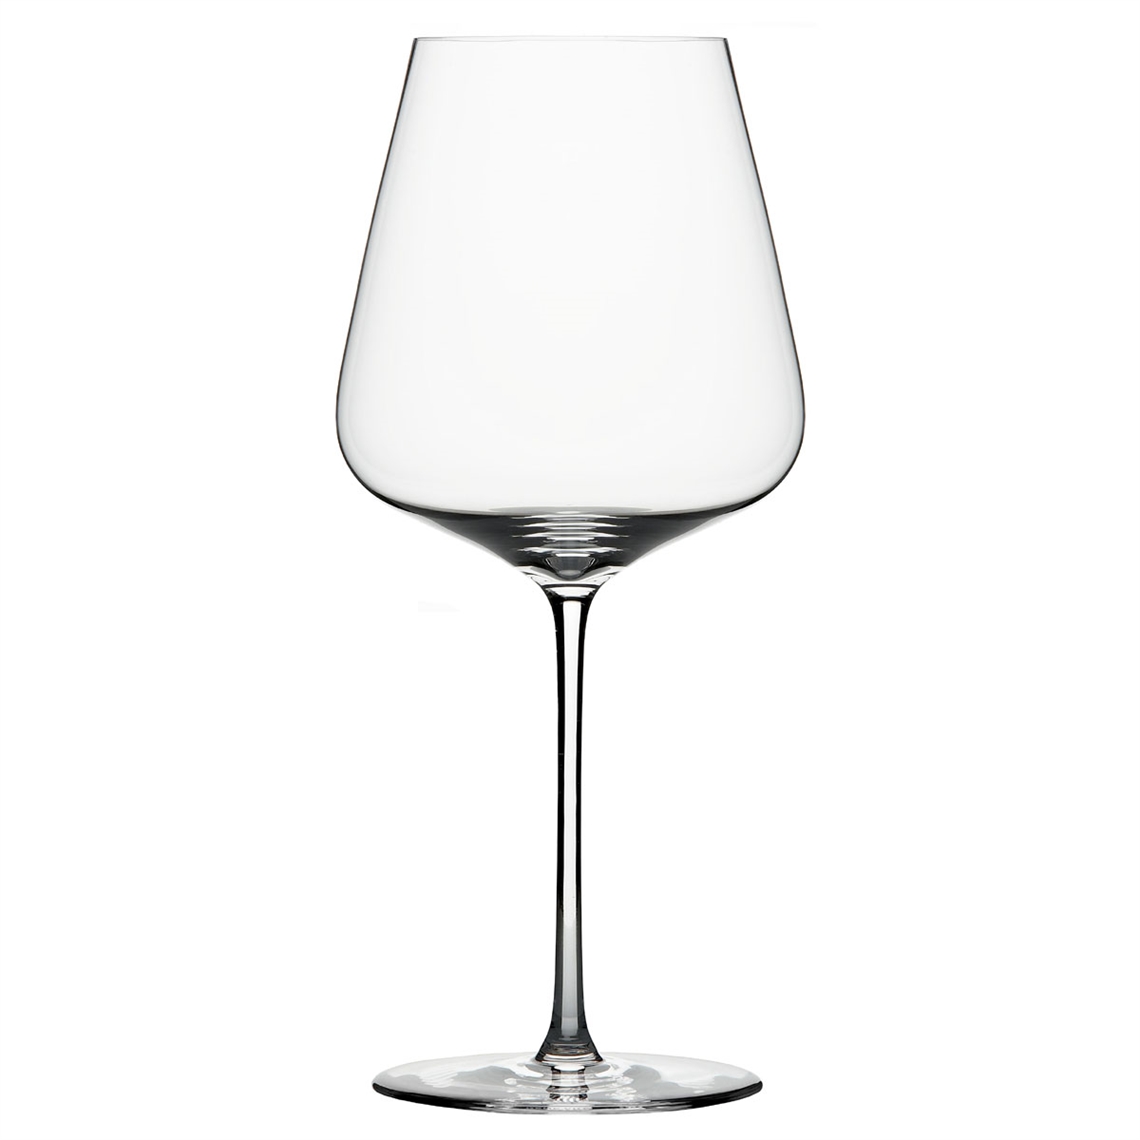 View more gin and tonic glasses from our Premium Mouth Blown Glassware range